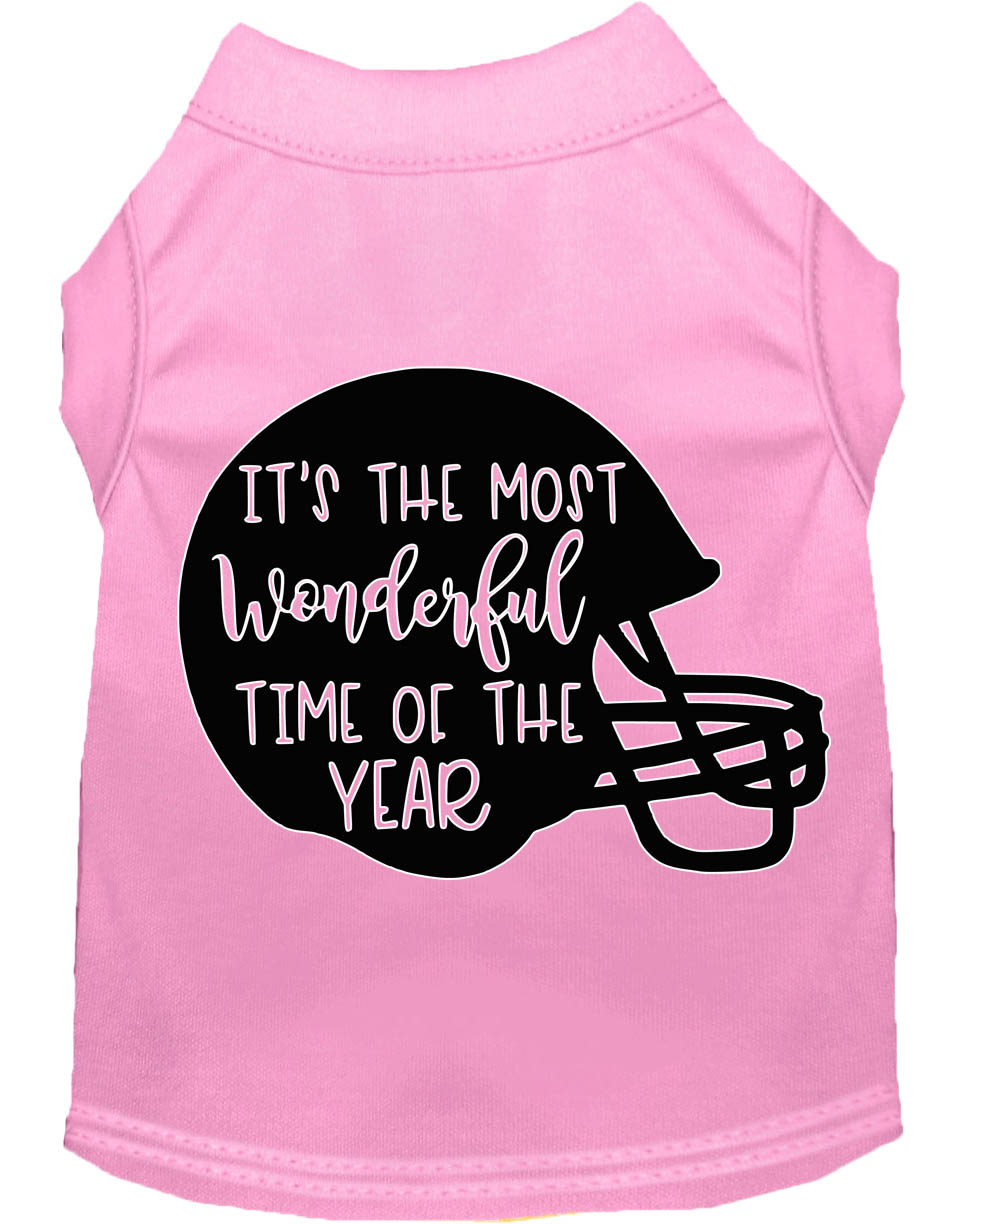 Most Wonderful Time of the Year (Football) Screen Print Dog Shirt Light Pink Med